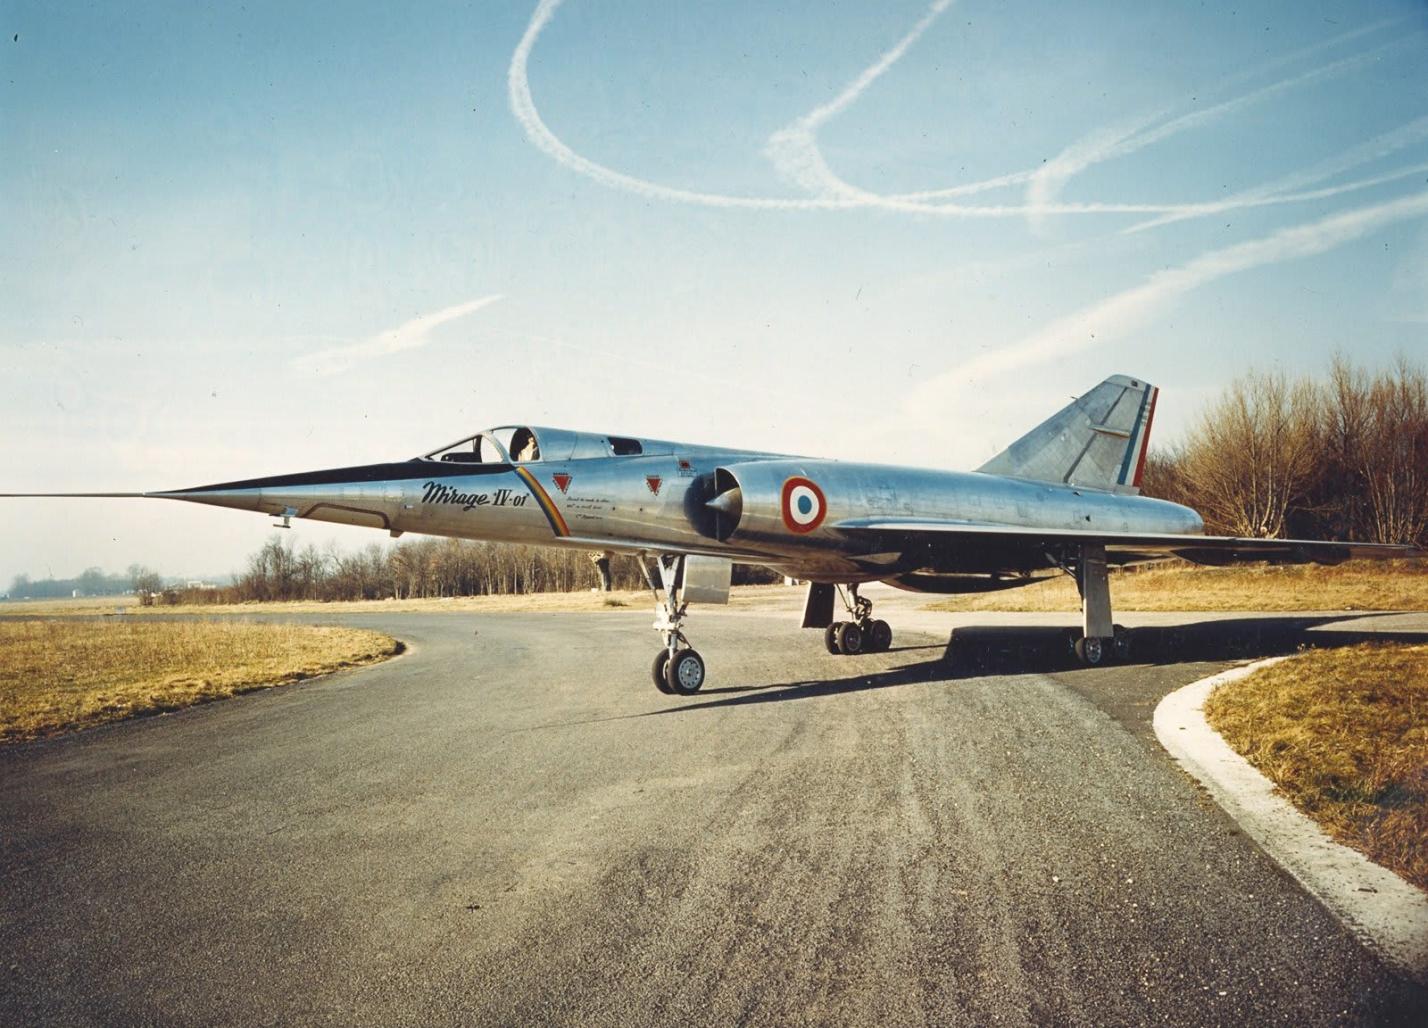 How Has Dassault Evolved Over the Years?